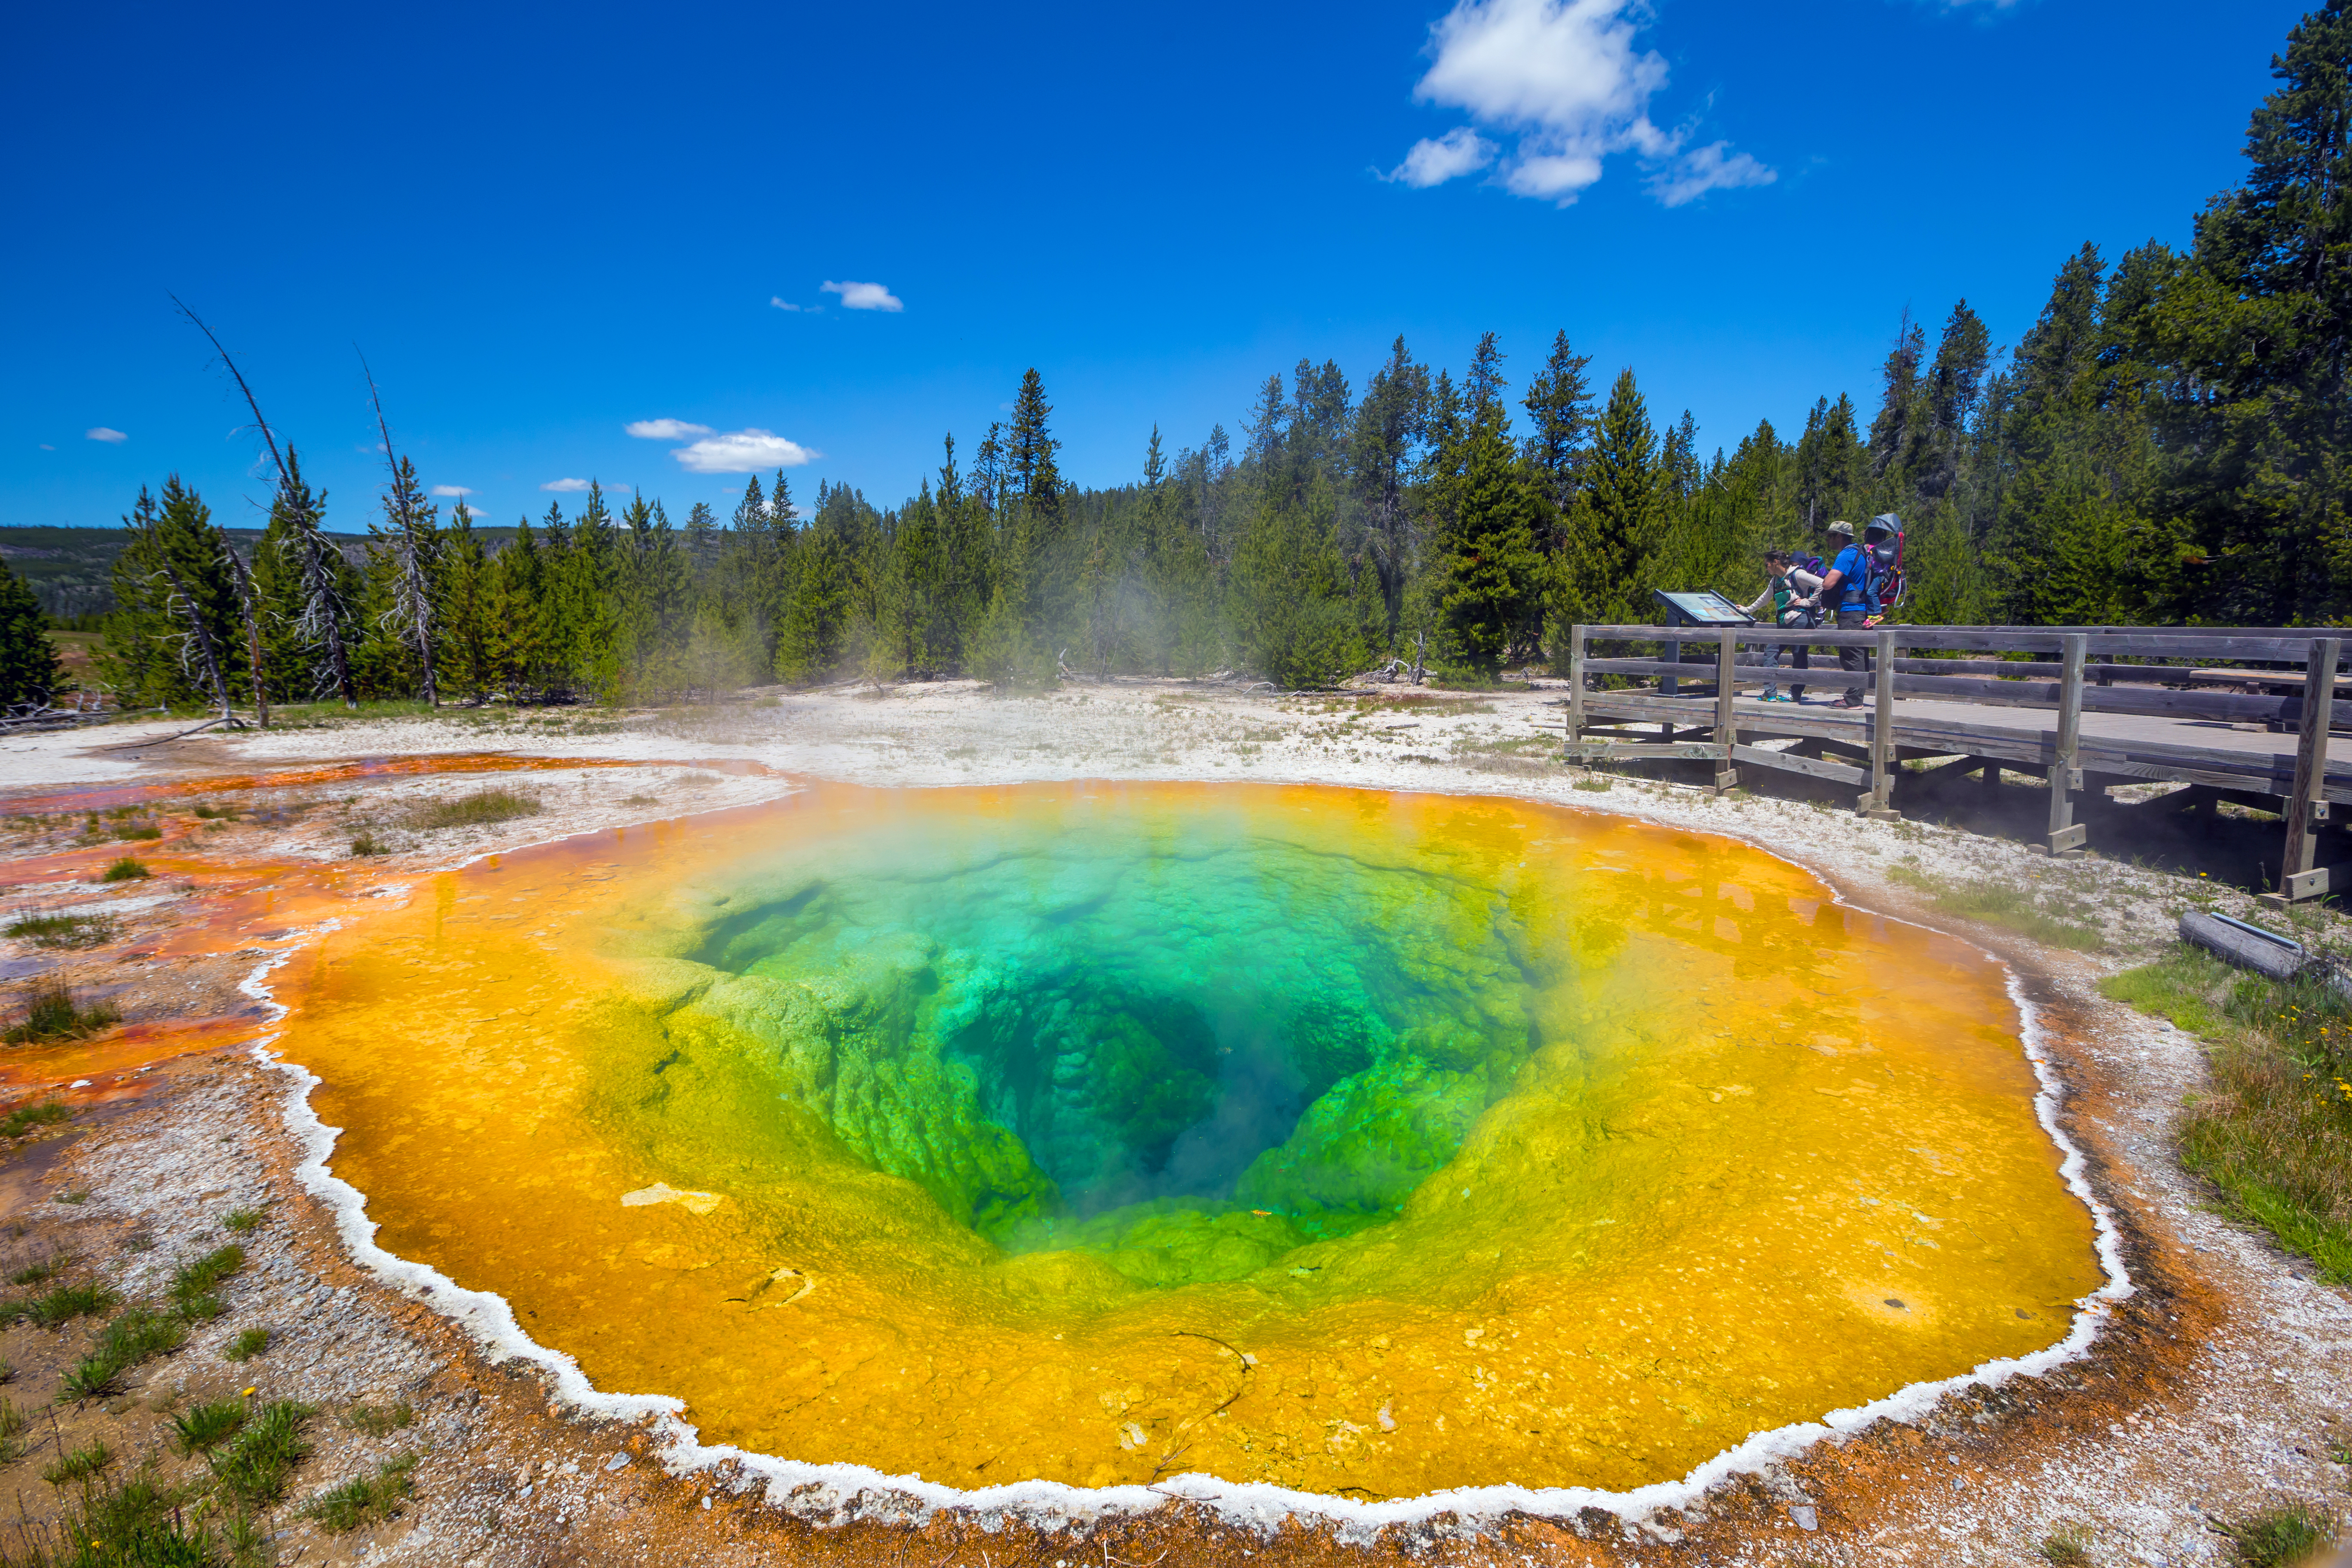 Morning Glory Pool in Yellowstone National Park of Wyoming, USA